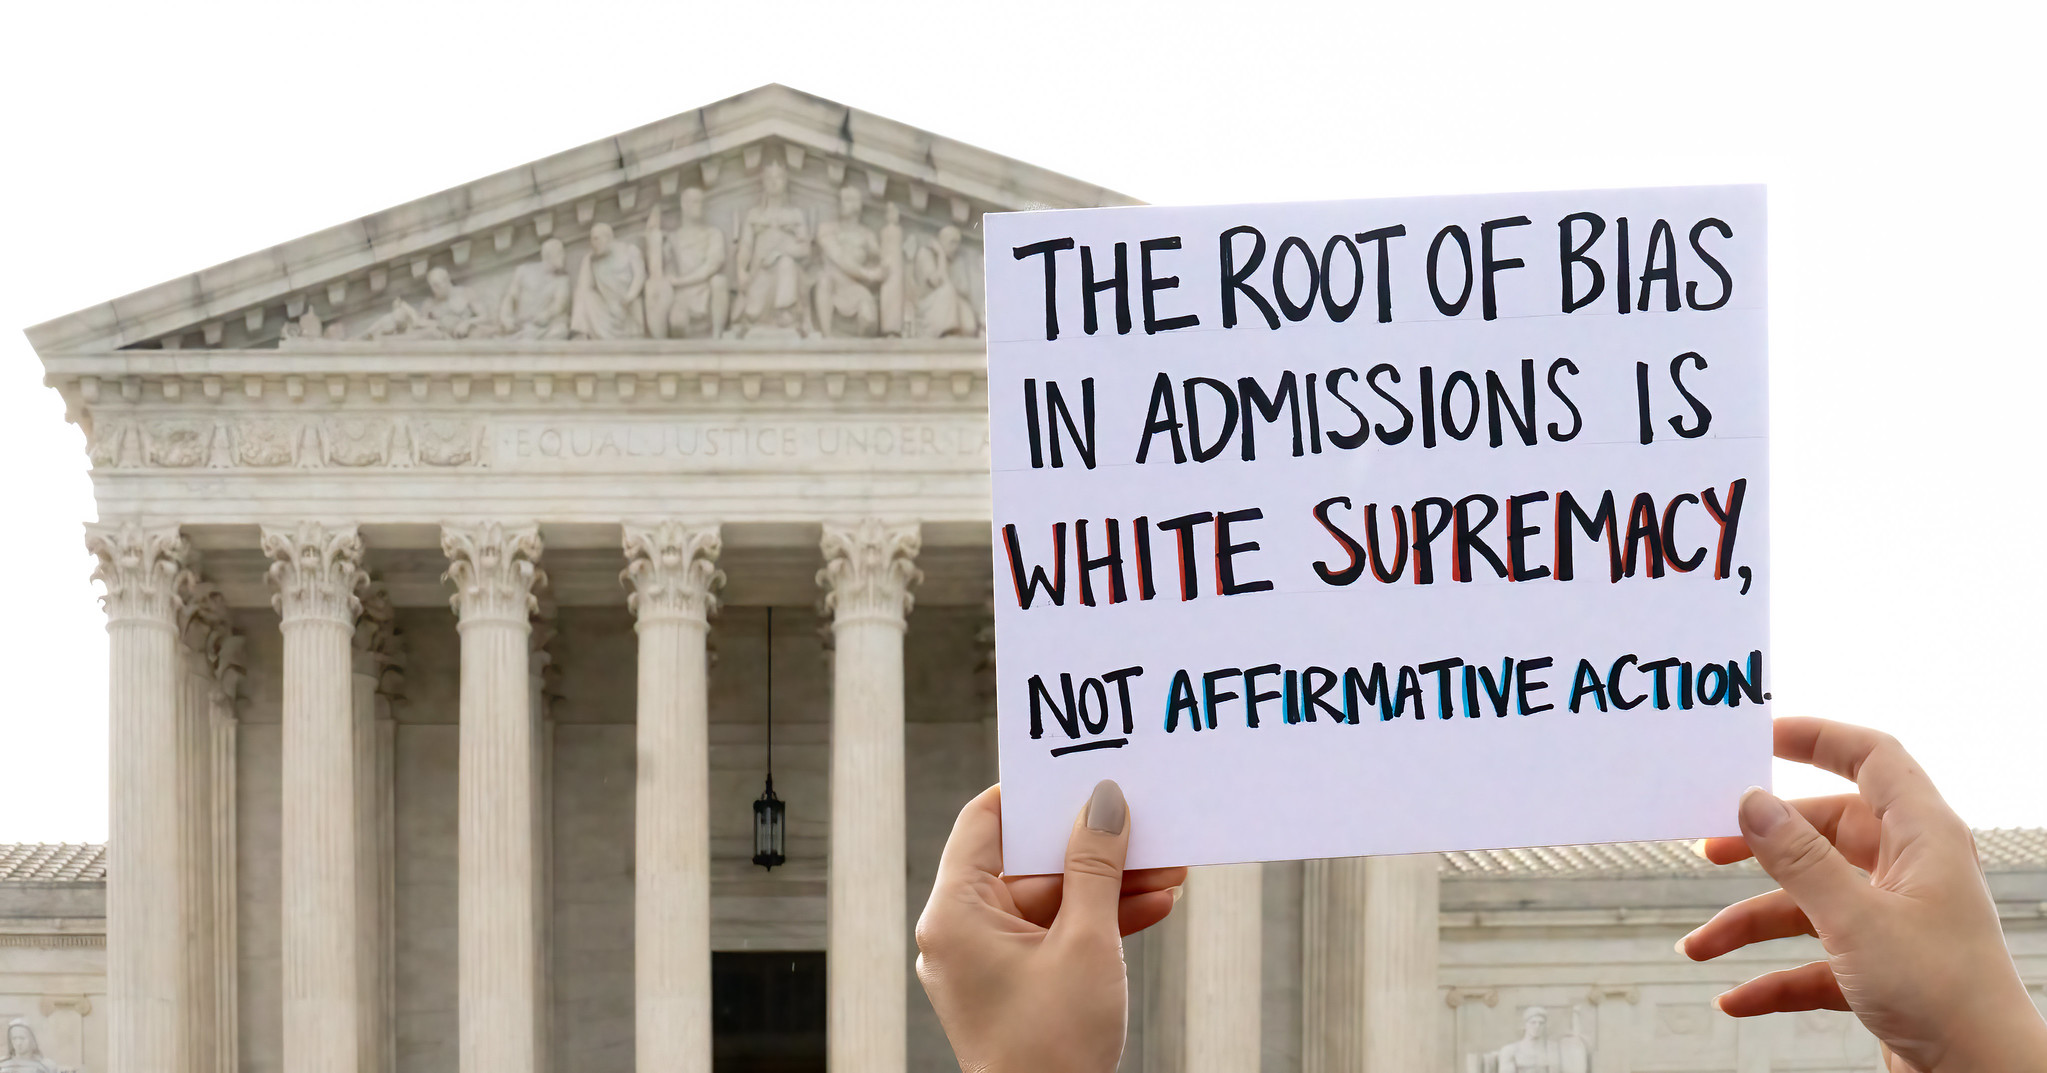 Outside the Supreme Court as affirmative action cases argued inside - Students for Fair Admissions ,Inc. v. President & Fellows of Harvard College, and Students for Fair Admissions, Inc. v. Univeristy of North Carolina (Photo Credit: Flickr / Victoria Pickering)